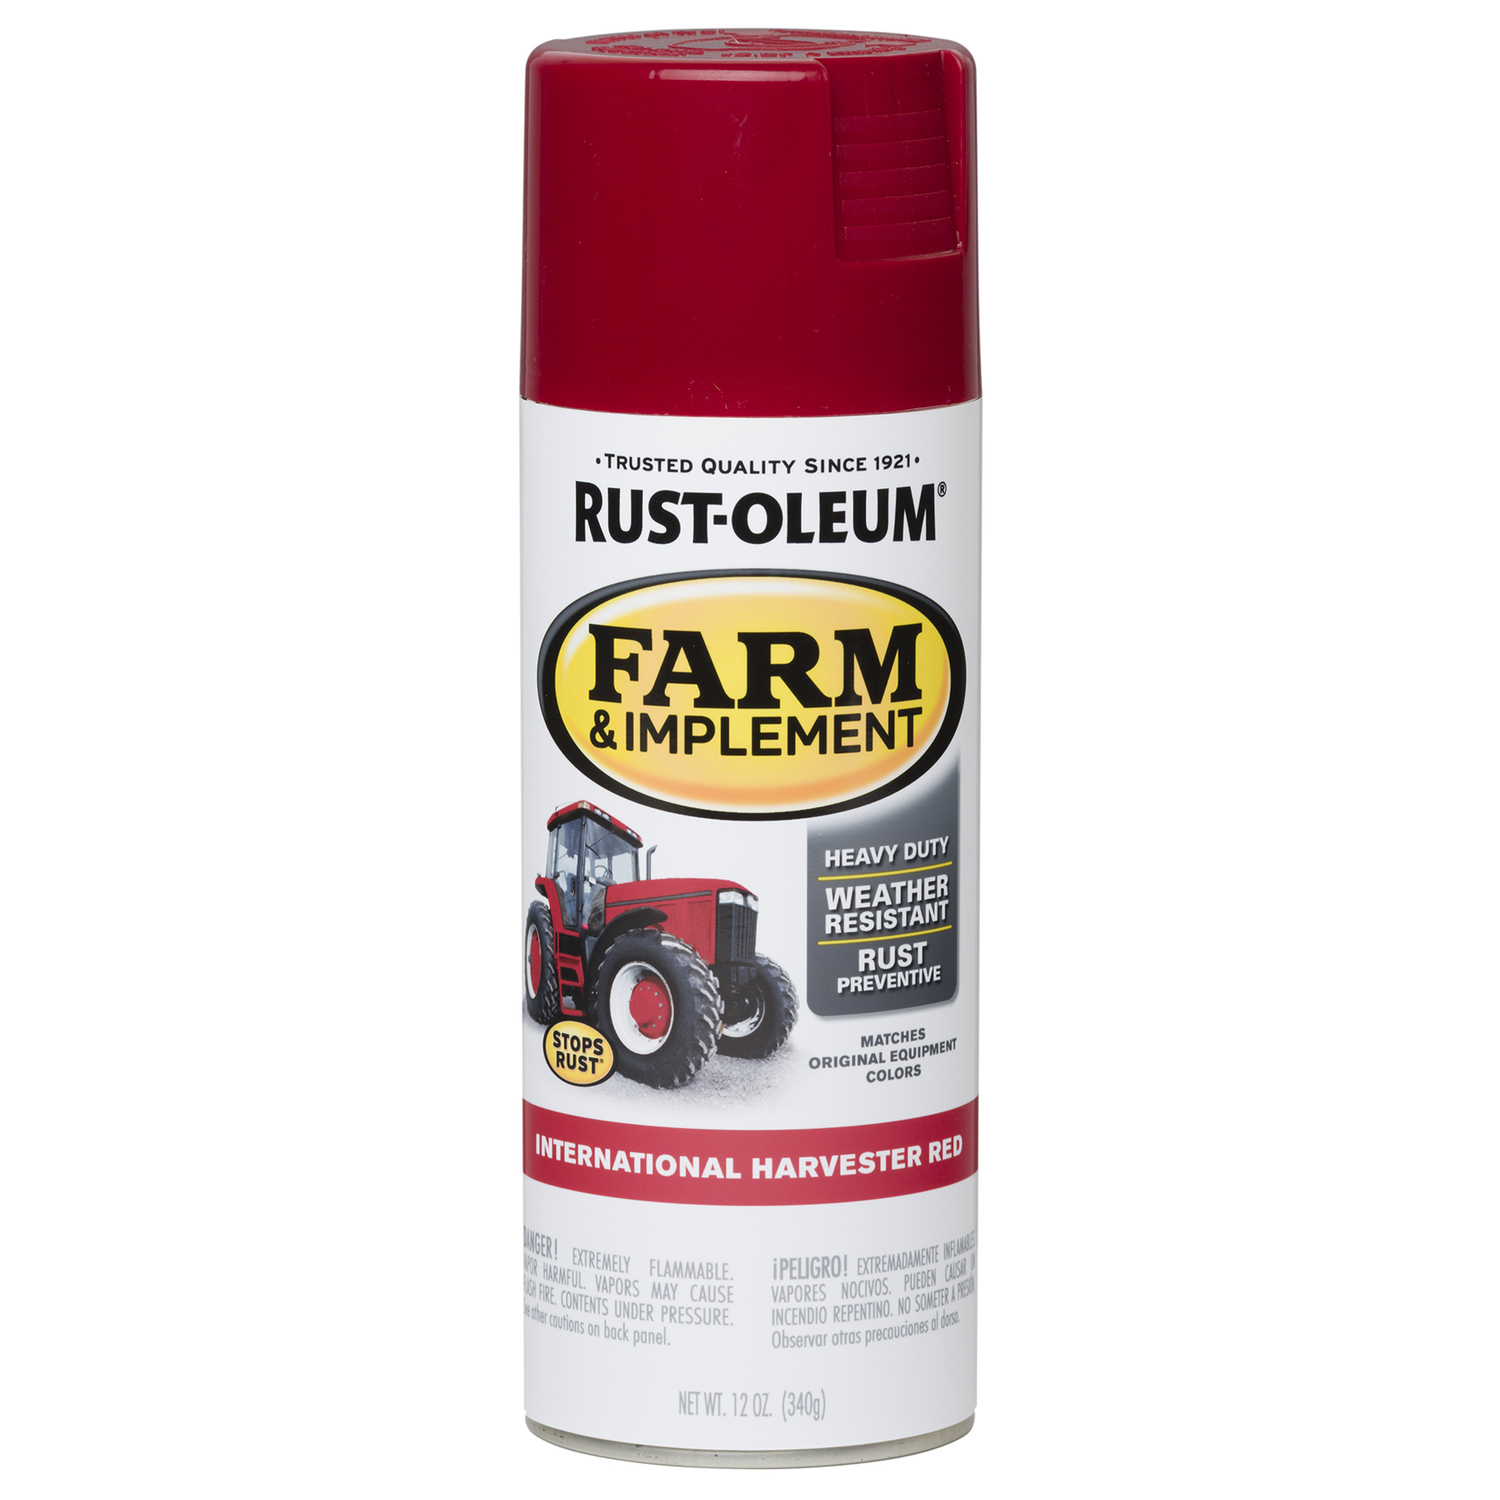 Rust-Oleum Specialty Indoor and Outdoor Gloss International Harvester Red Farm & Implement 12 oz